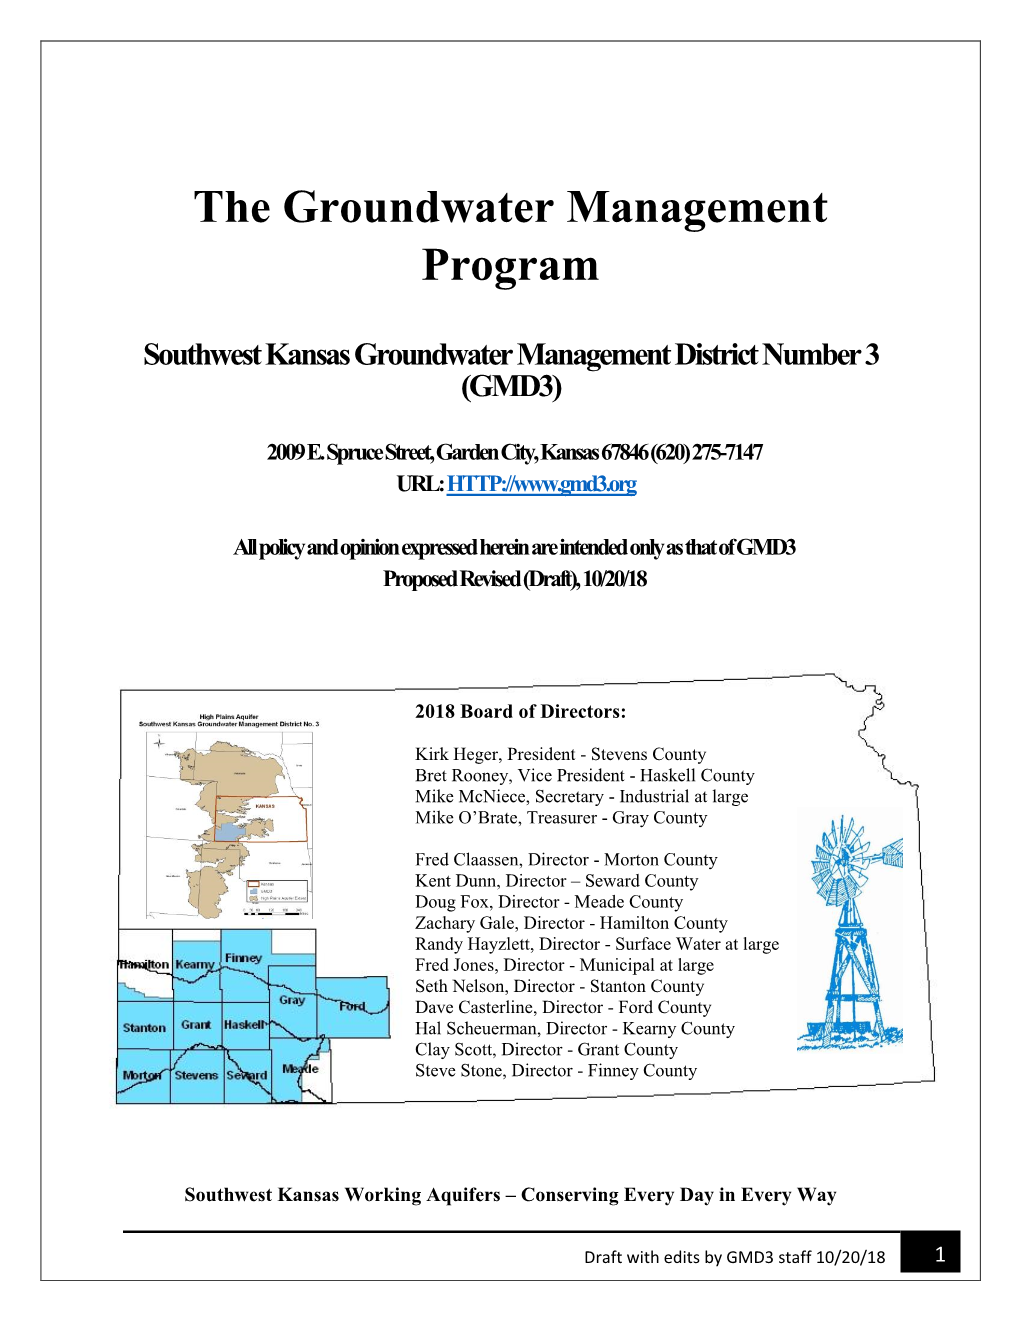 The Groundwater Management Program